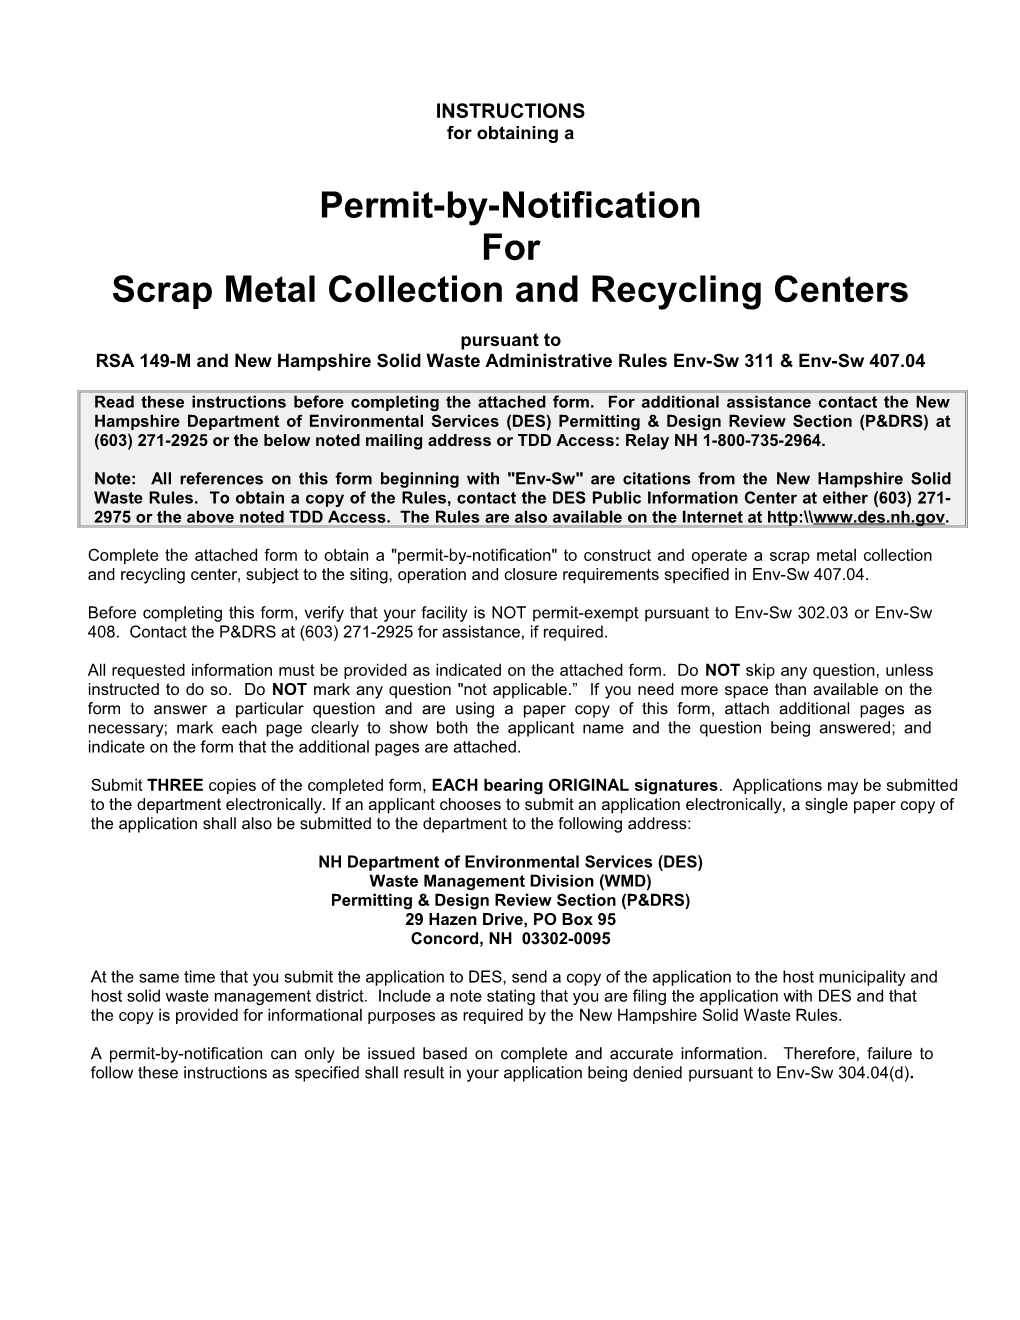 Scrap Metal Collection and Recycling Centers